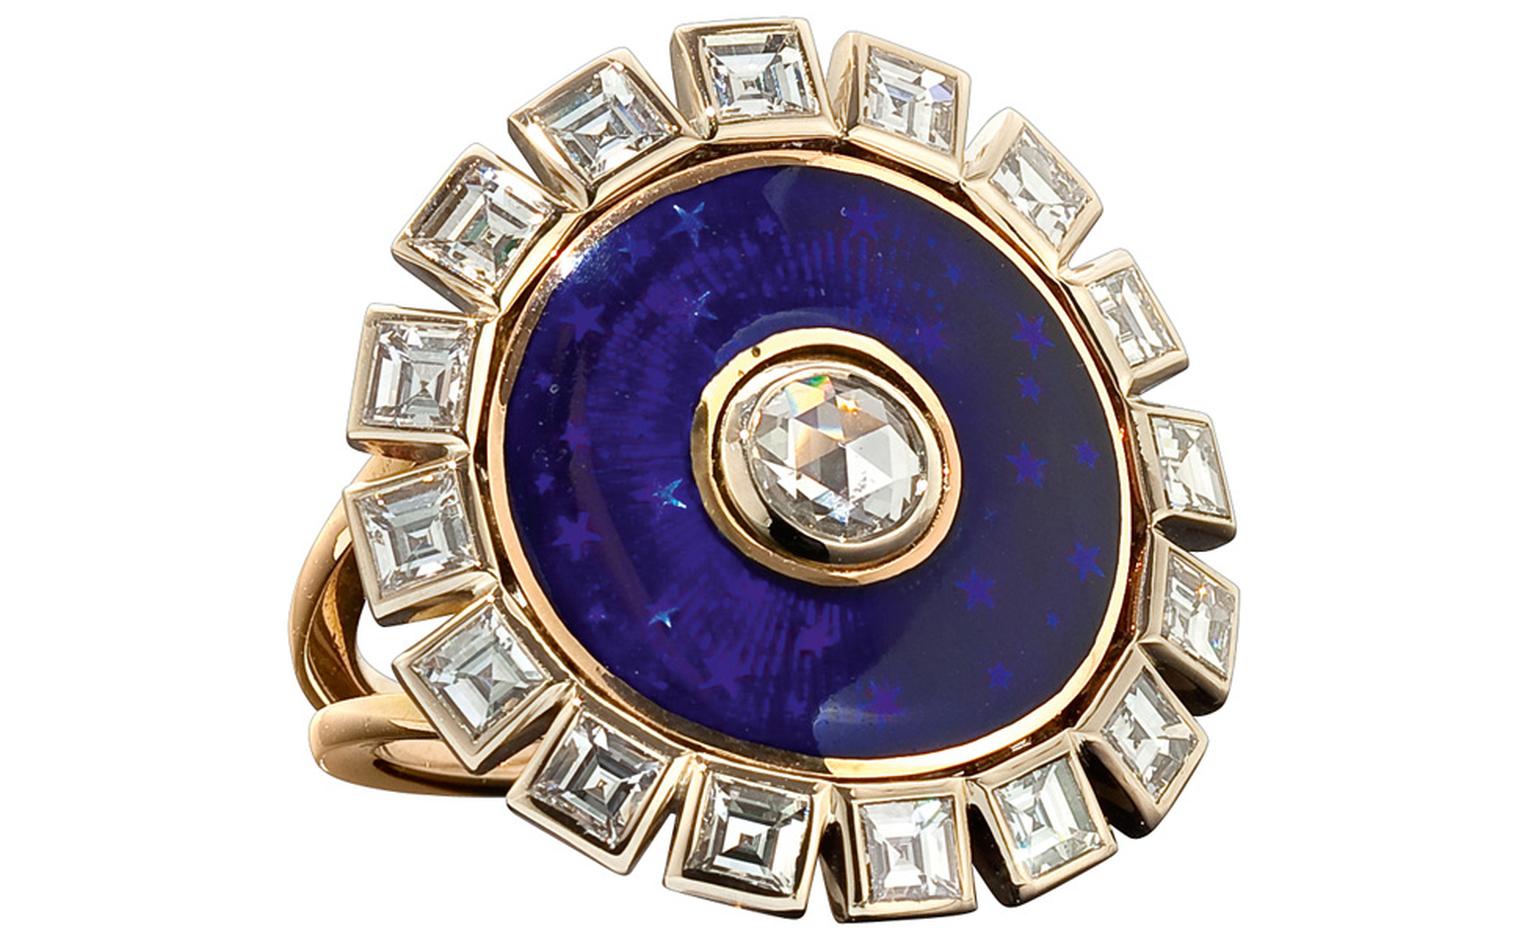 Solange Azagury-Partridge Duchess Ring with diamonds and enamel. Made to order and price on request.